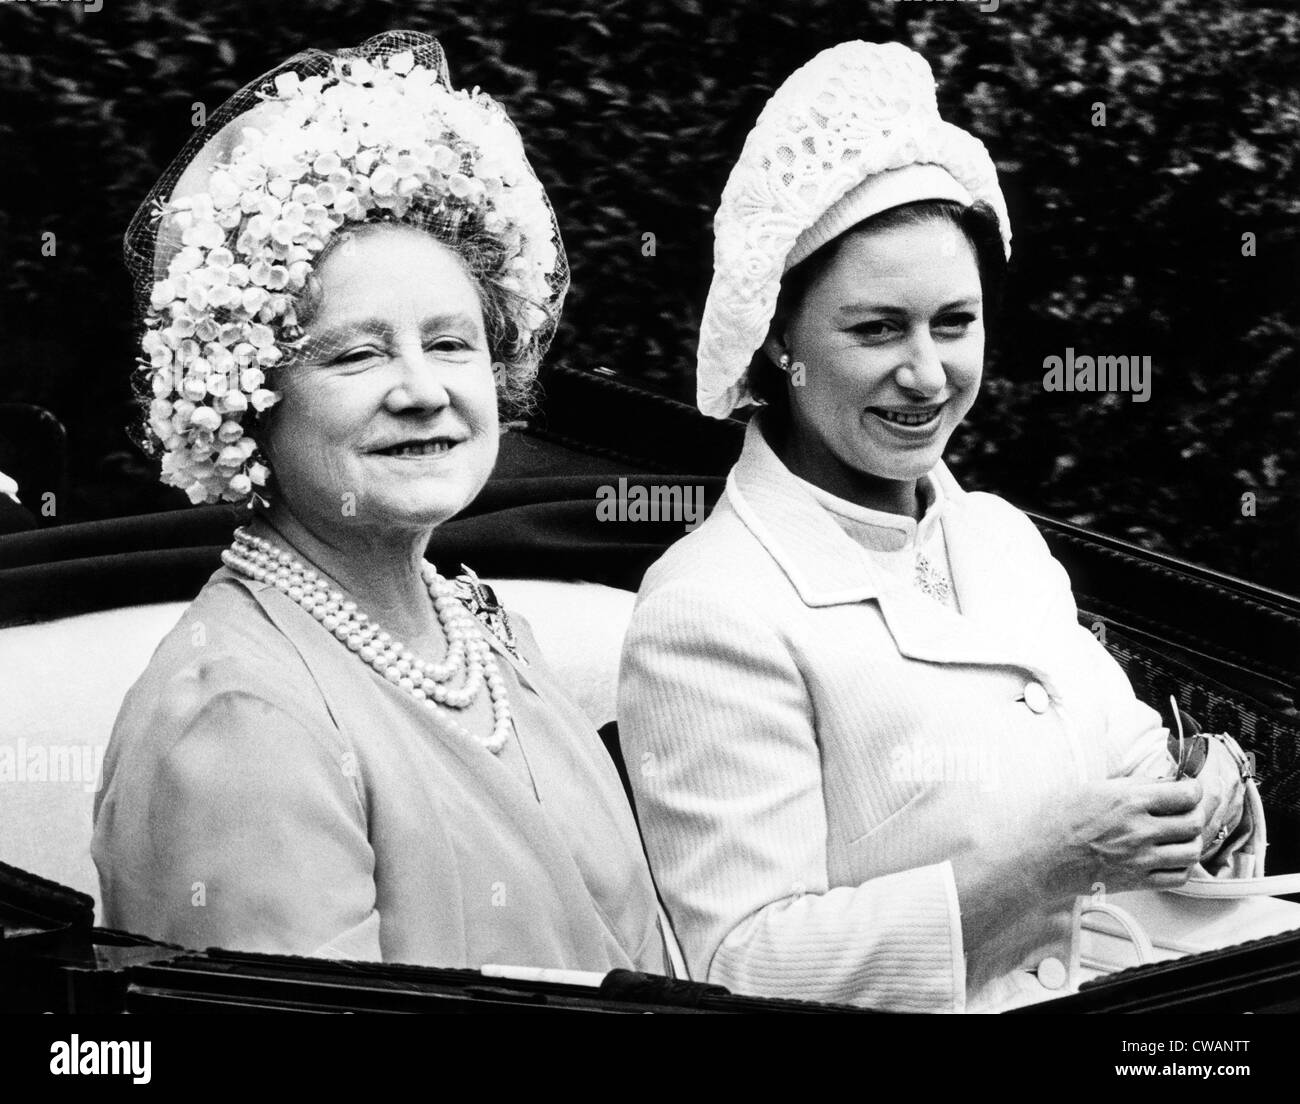 Queen Elizabeth (the Queen Mother), Princess Margaret, arriving on the first day of the Royal Ascot Races in England, 1968.. Stock Photo